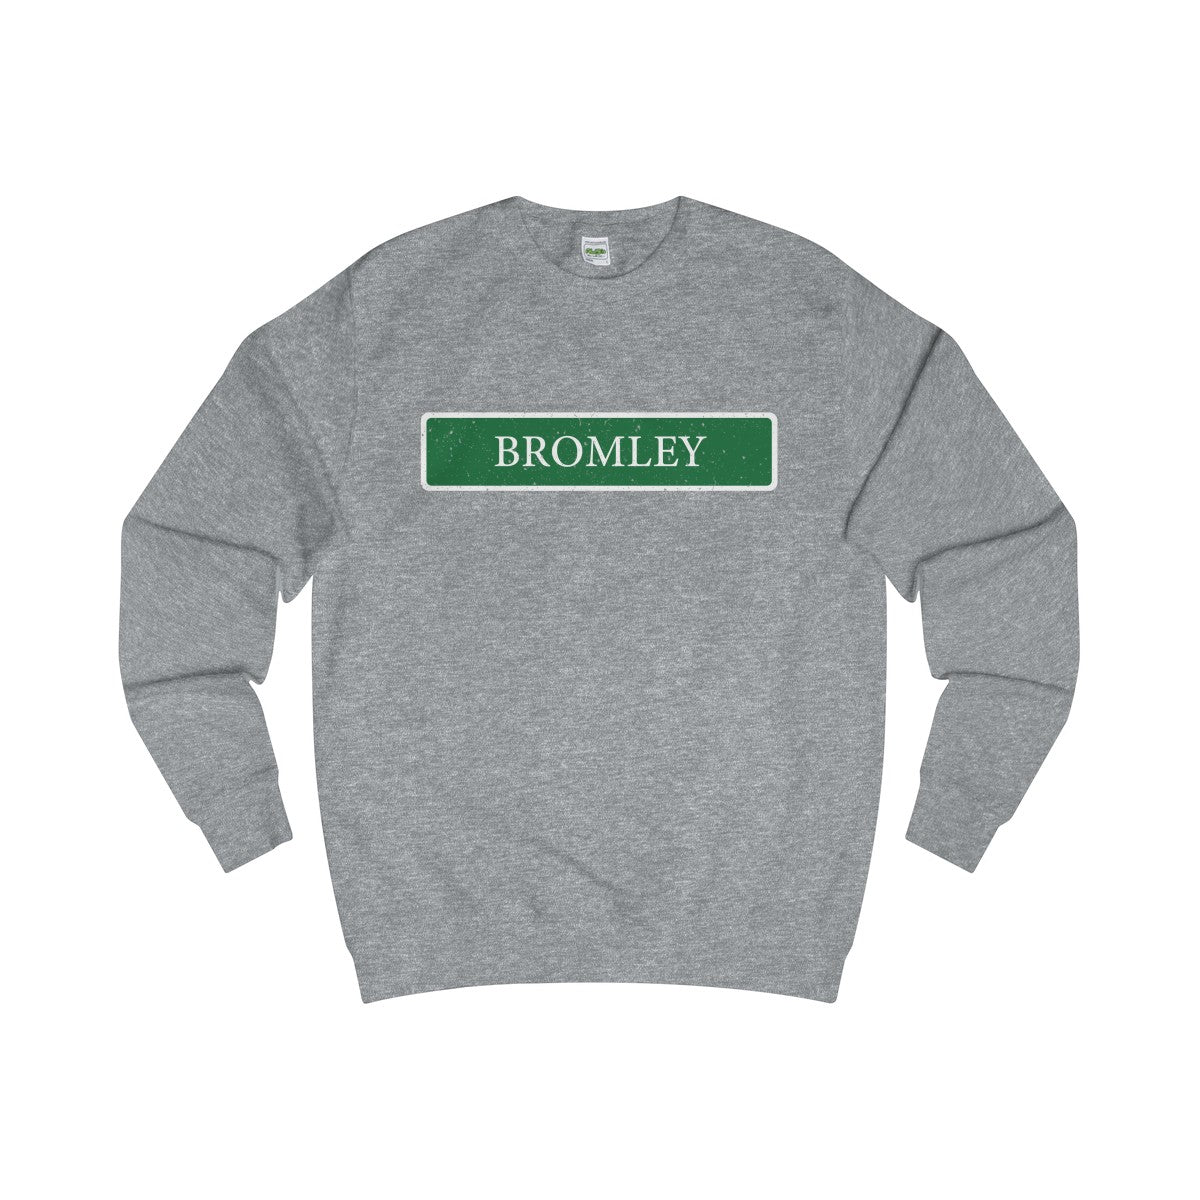 Bromley Road Sign Sweater